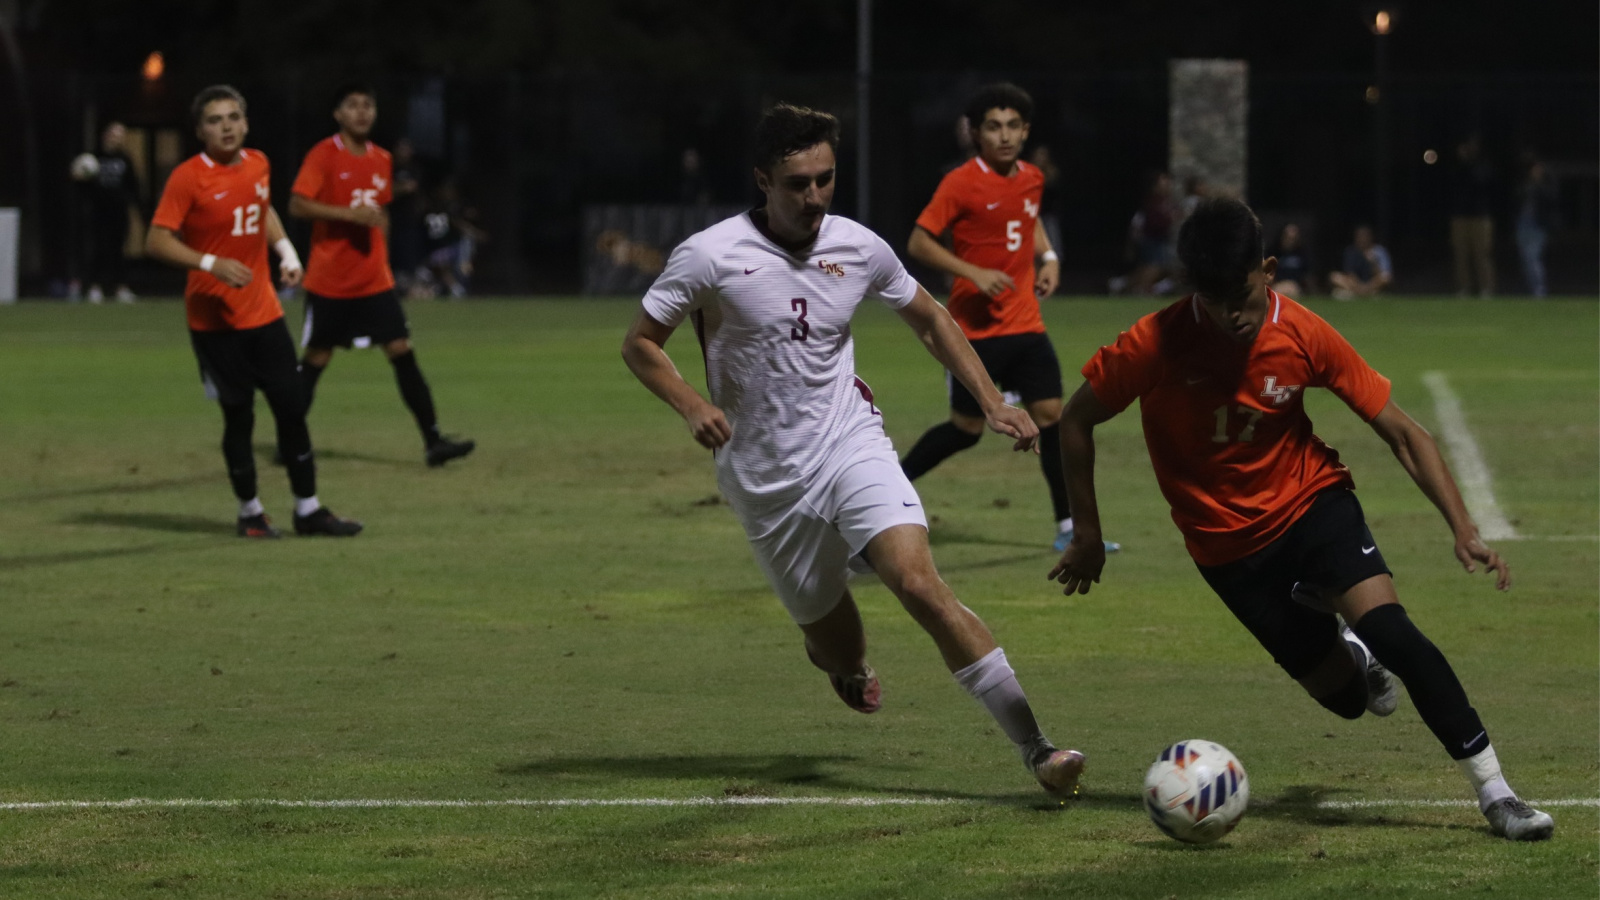 Leopards Battle Stags In Road SCIAC Match-Up